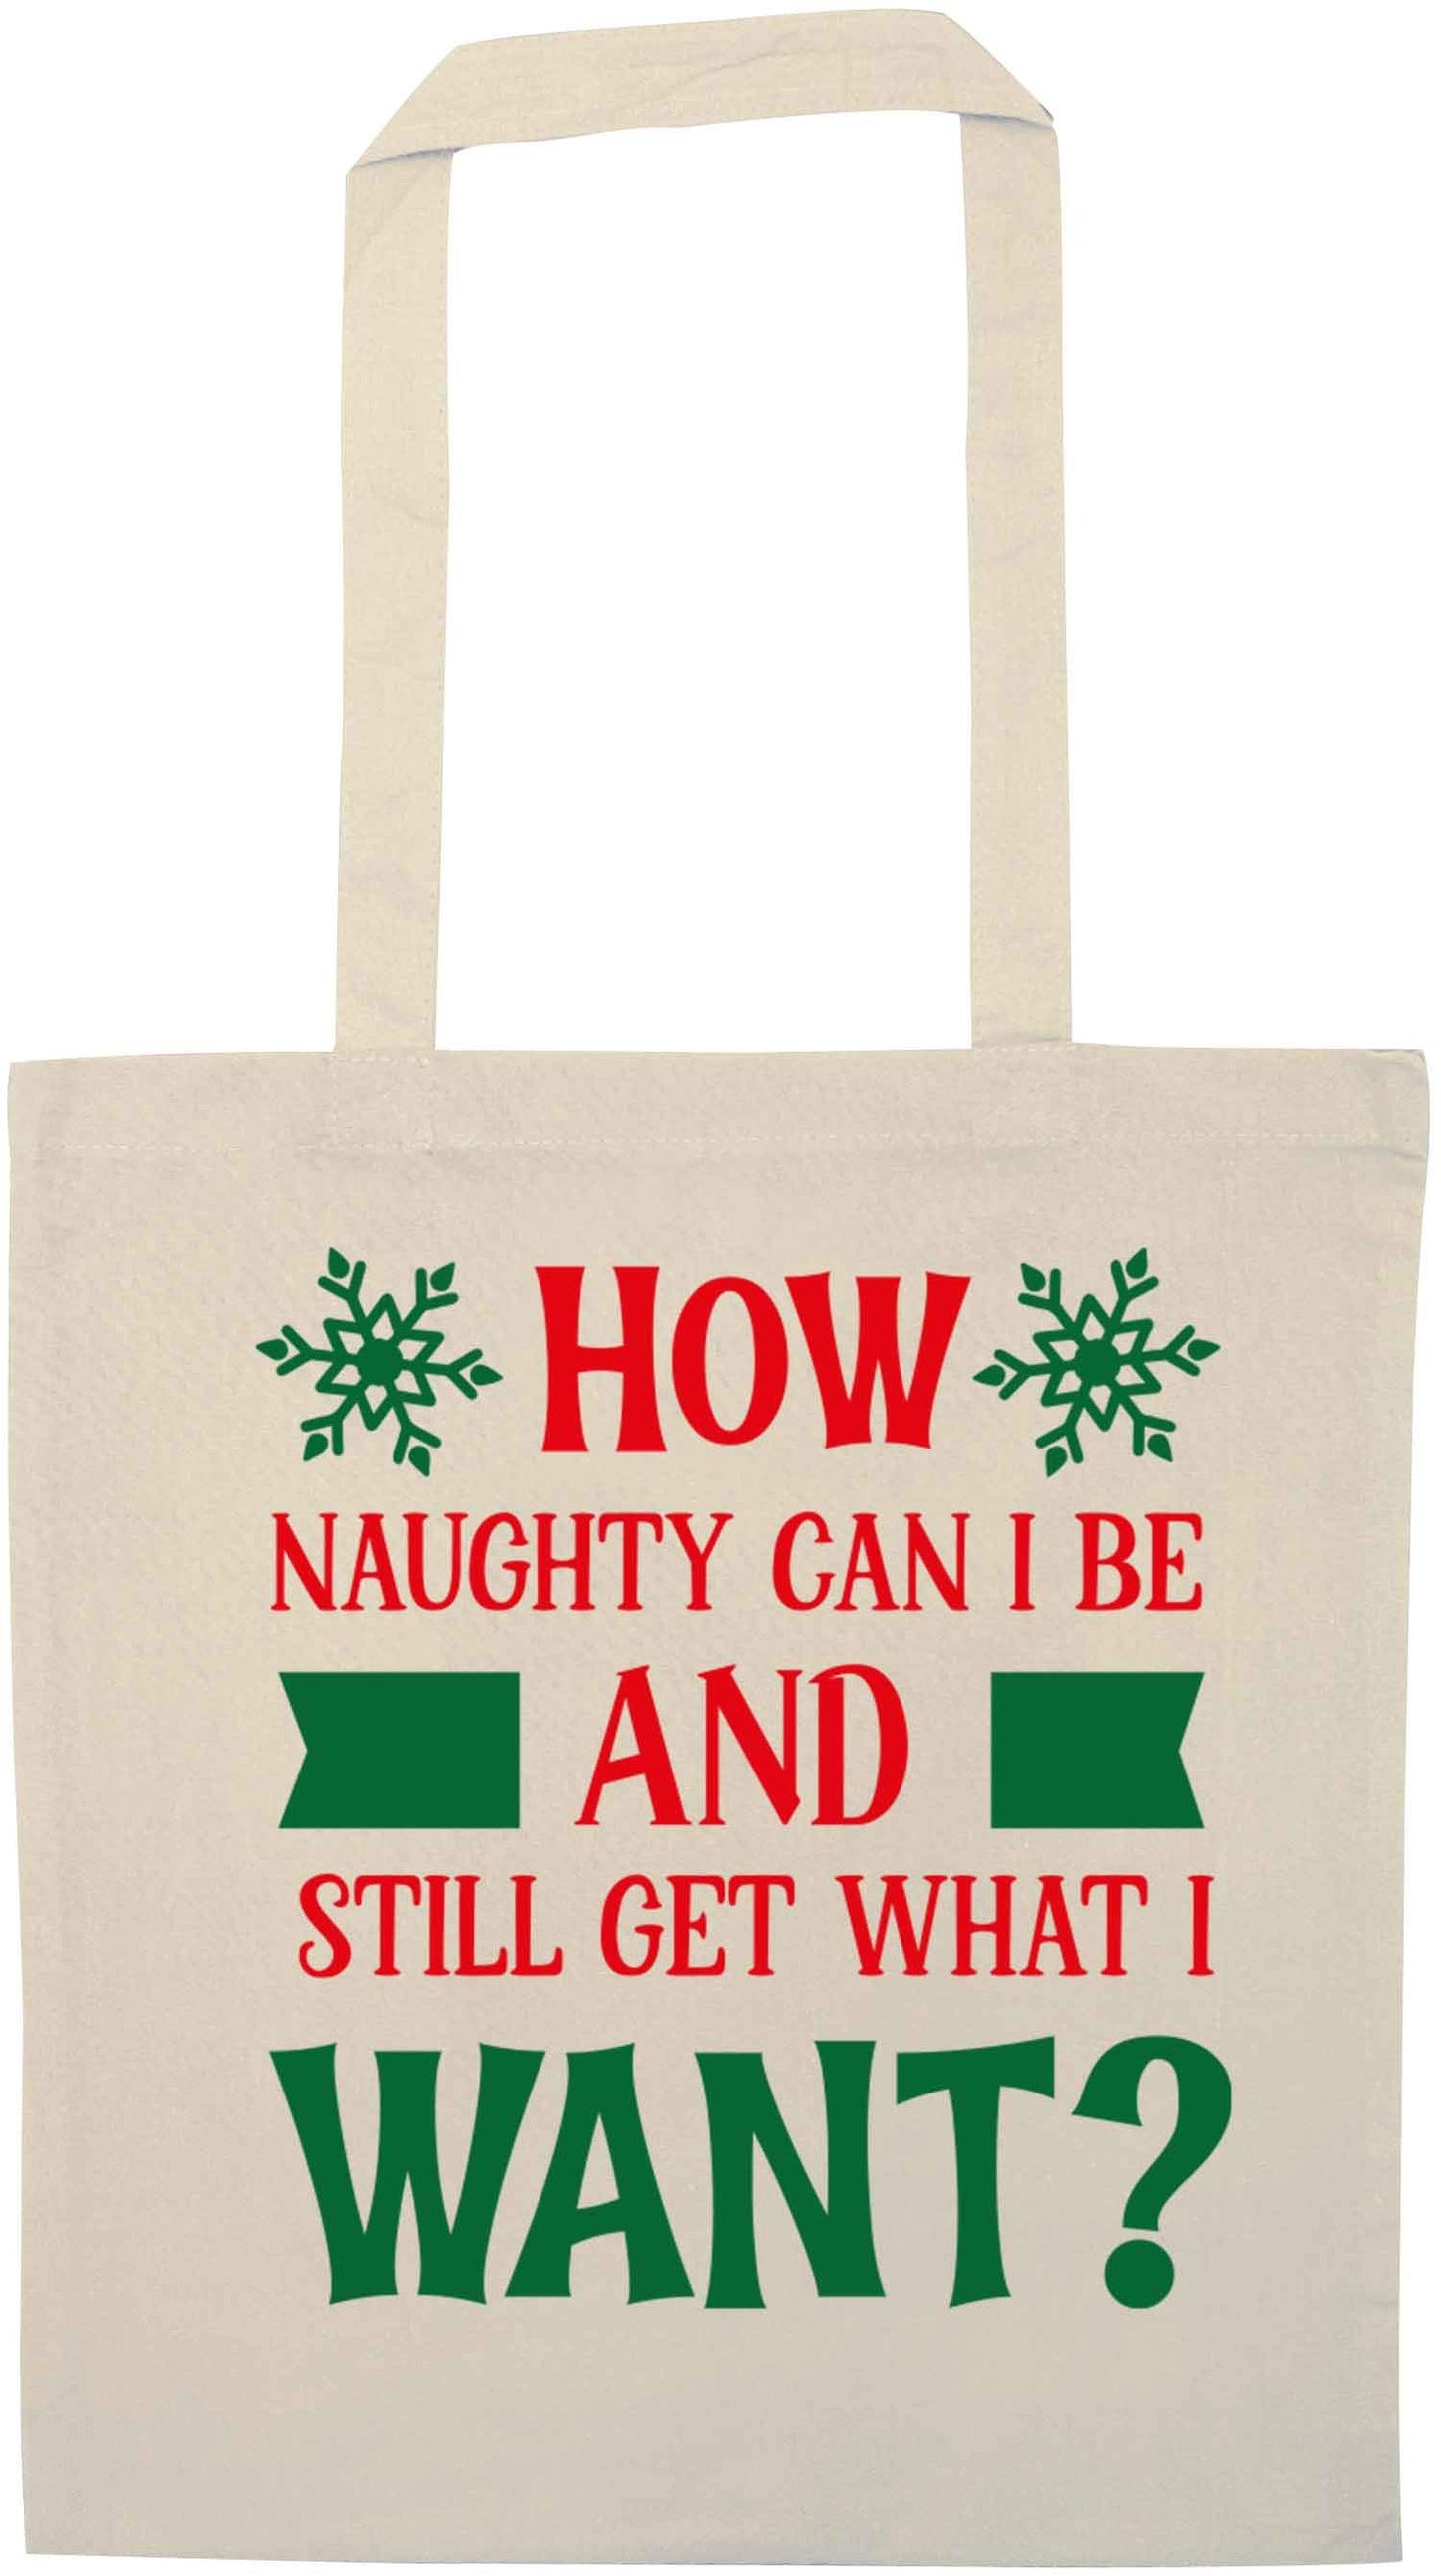 How naughty can I be and still get what I want? natural tote bag